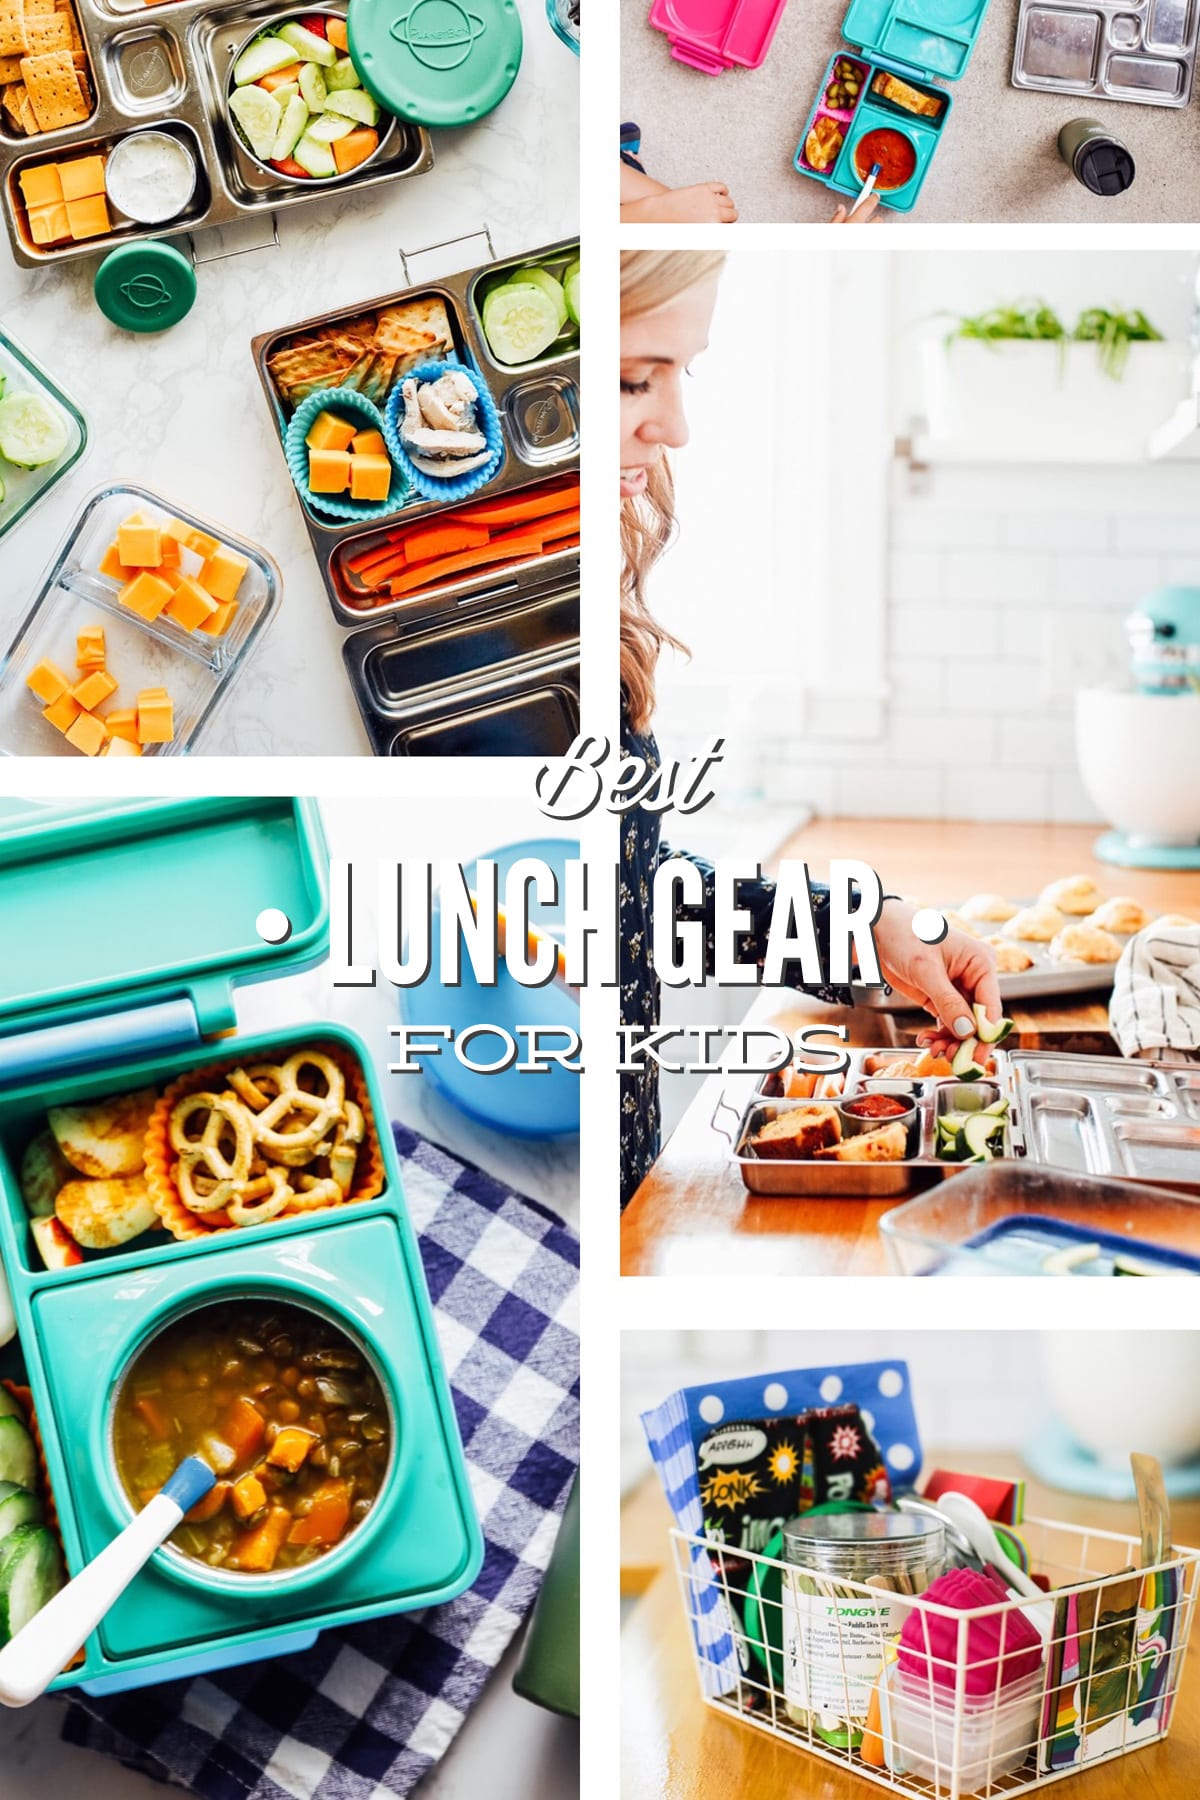 The Best Lunchbox Gear for Kids